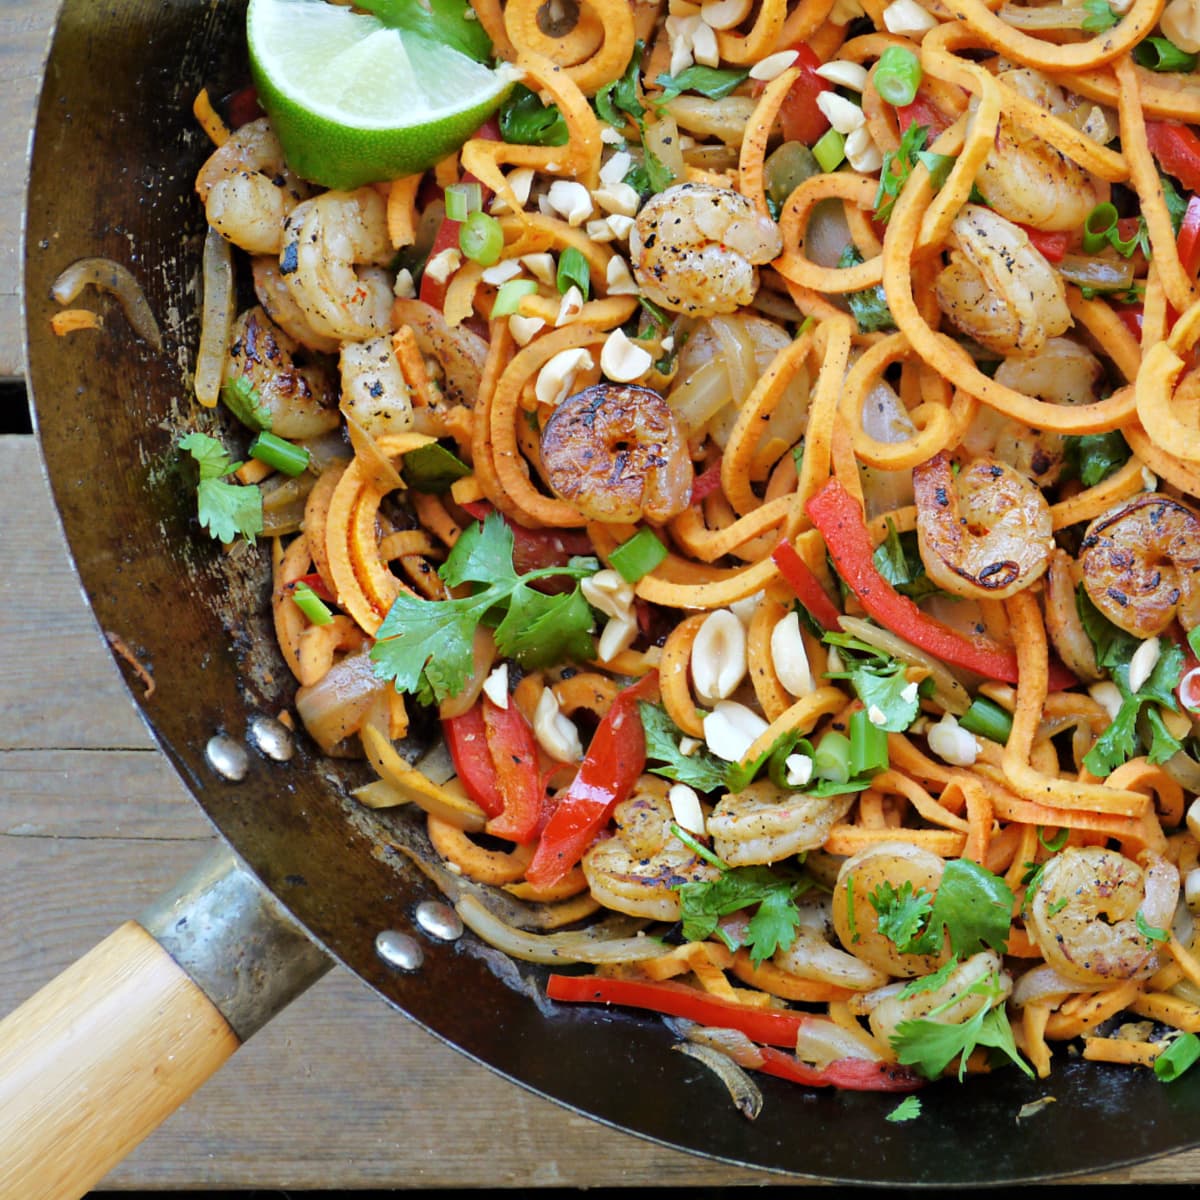 Large wok with sweet potato noodles, vegetables, and shrimp. Garnished with cilantro and peanuts.